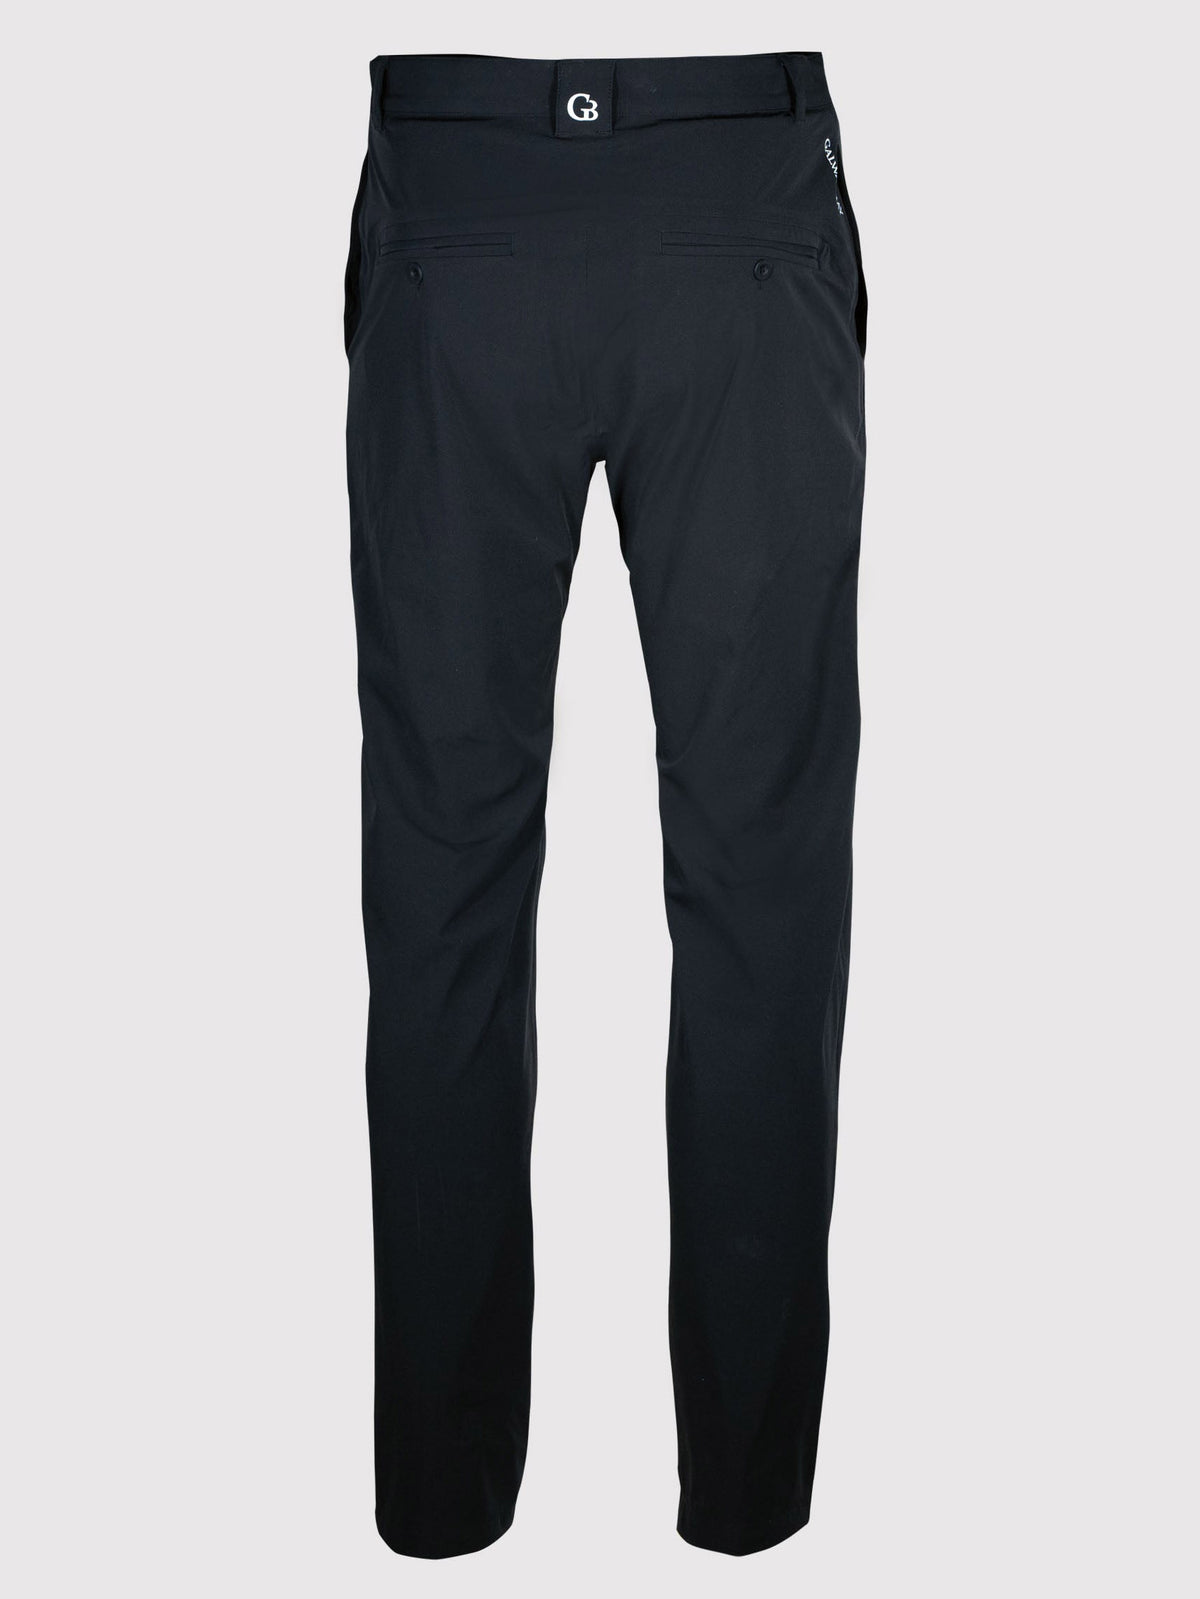 The back of black Tapered All-Weather Lined Pant